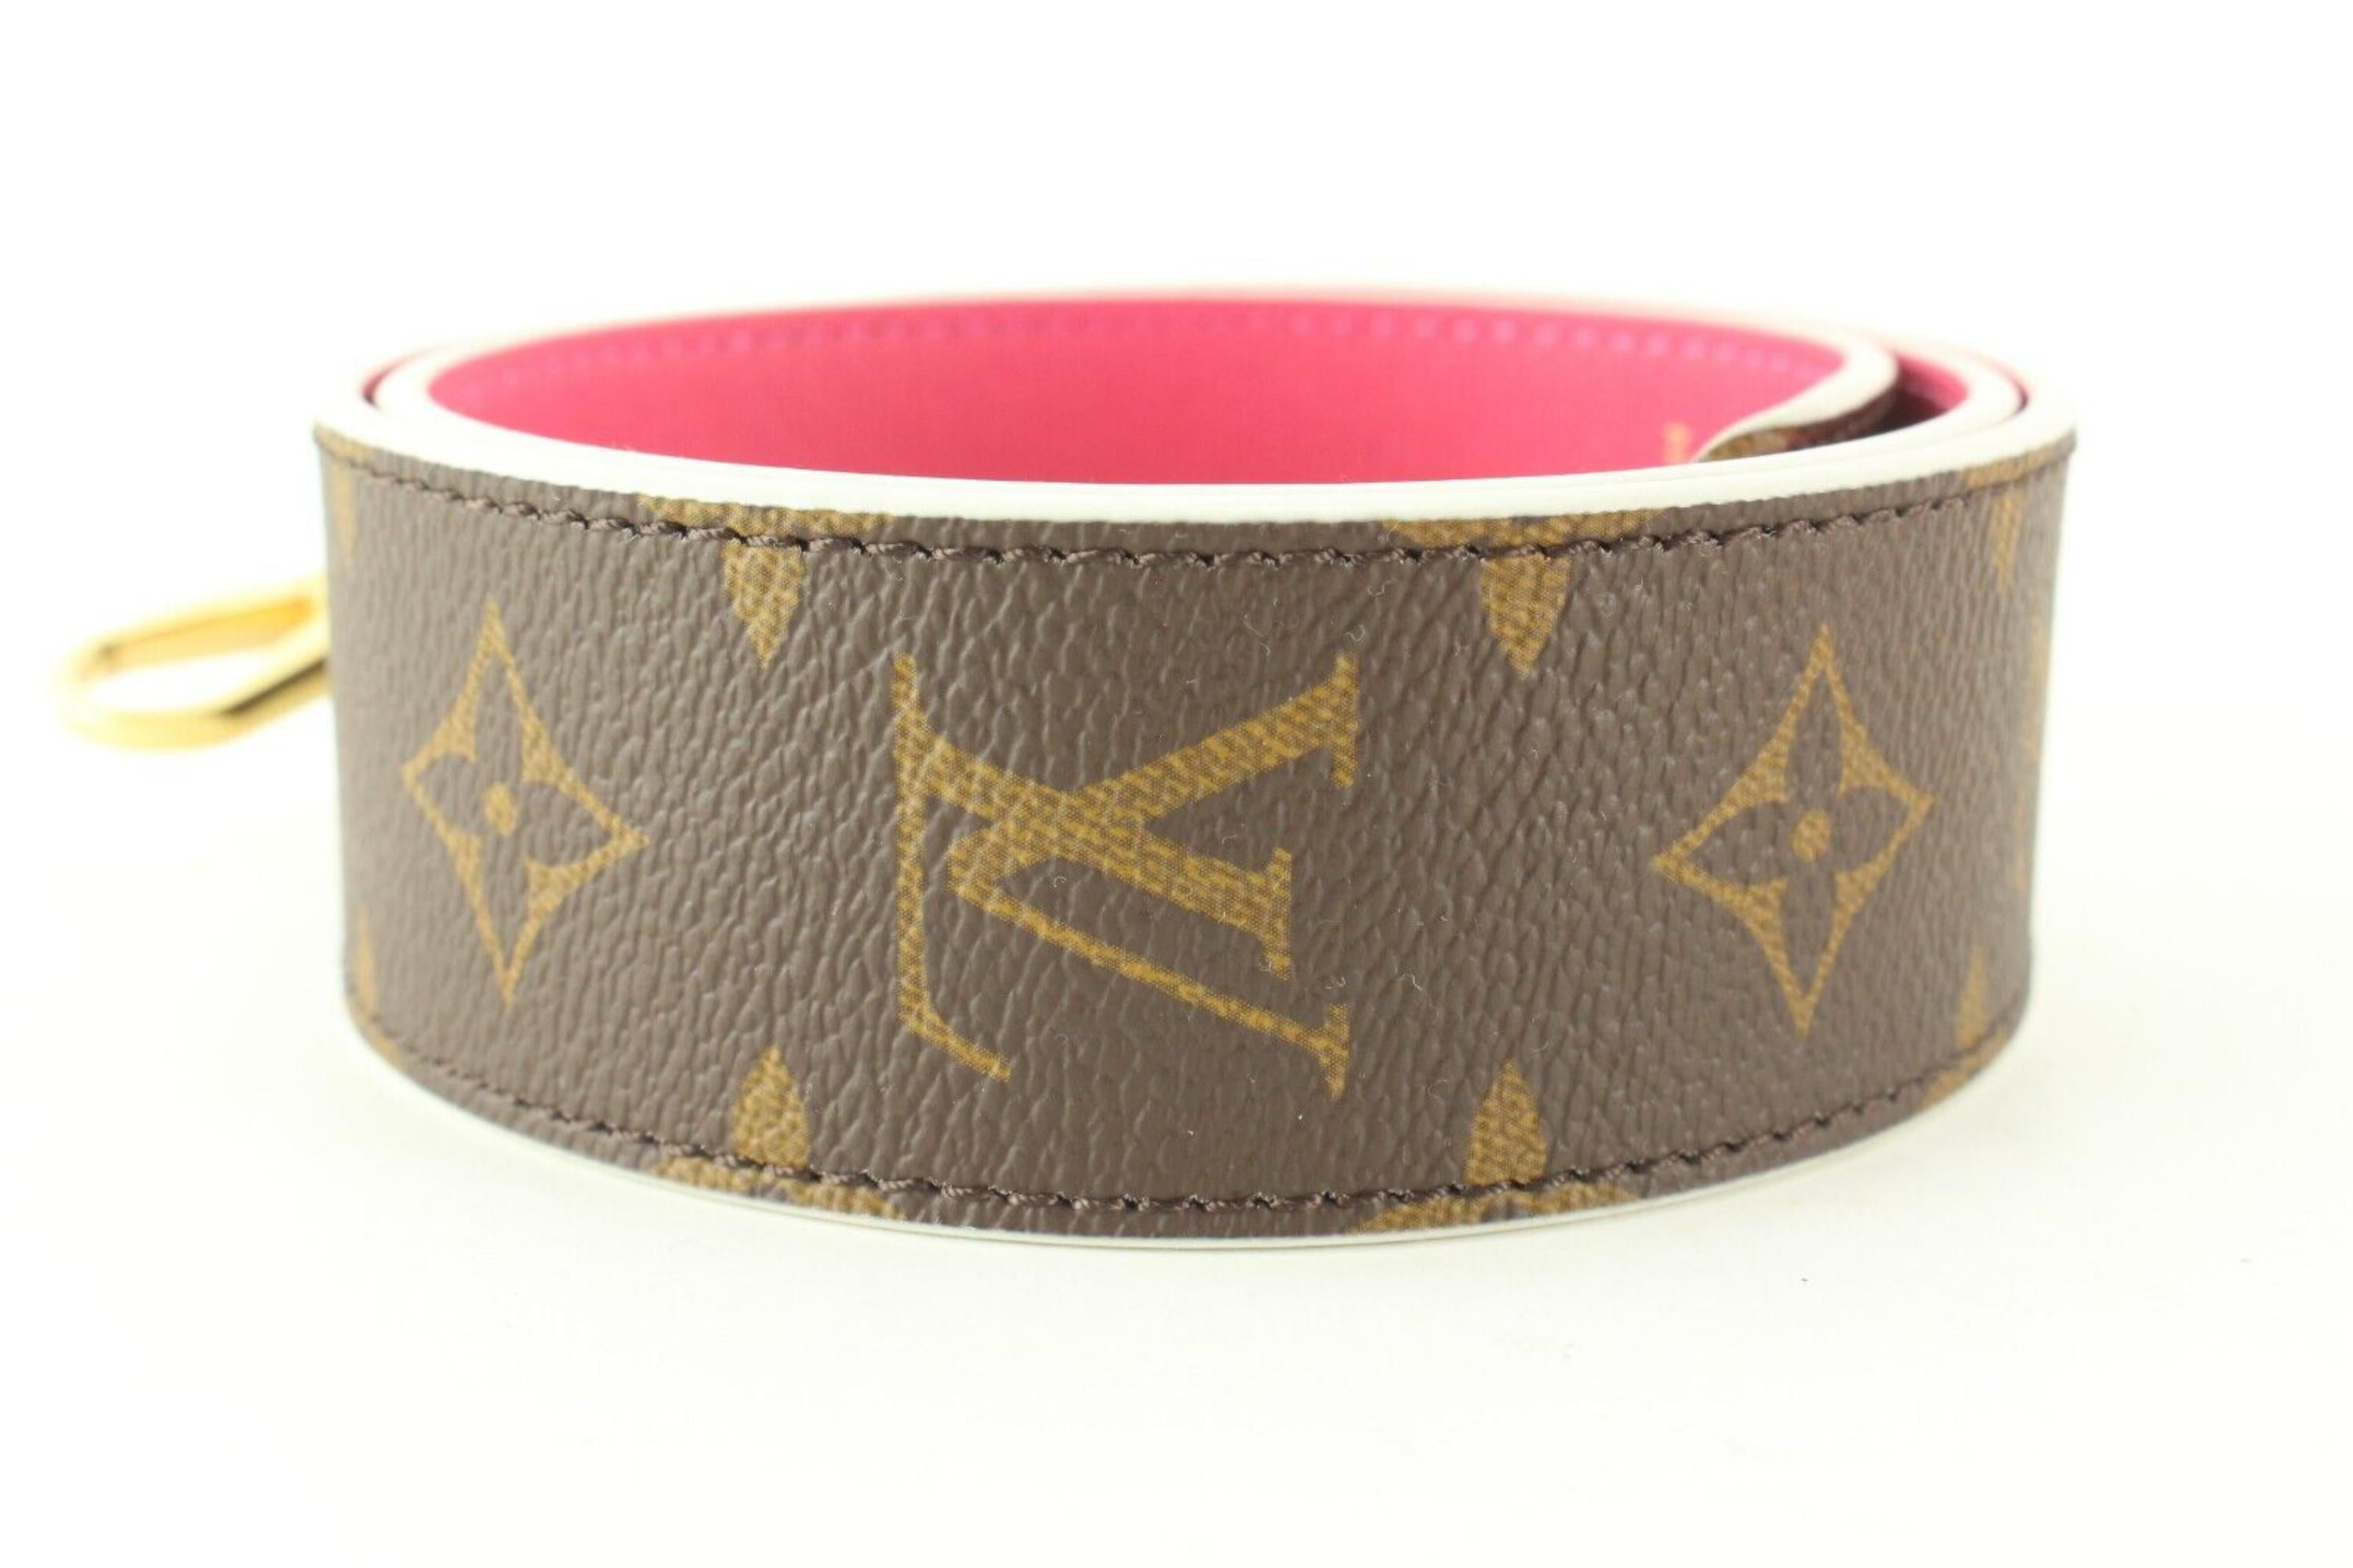 Authentic Louis Vuitton Pink Red Reversible Belt Monogram with Box